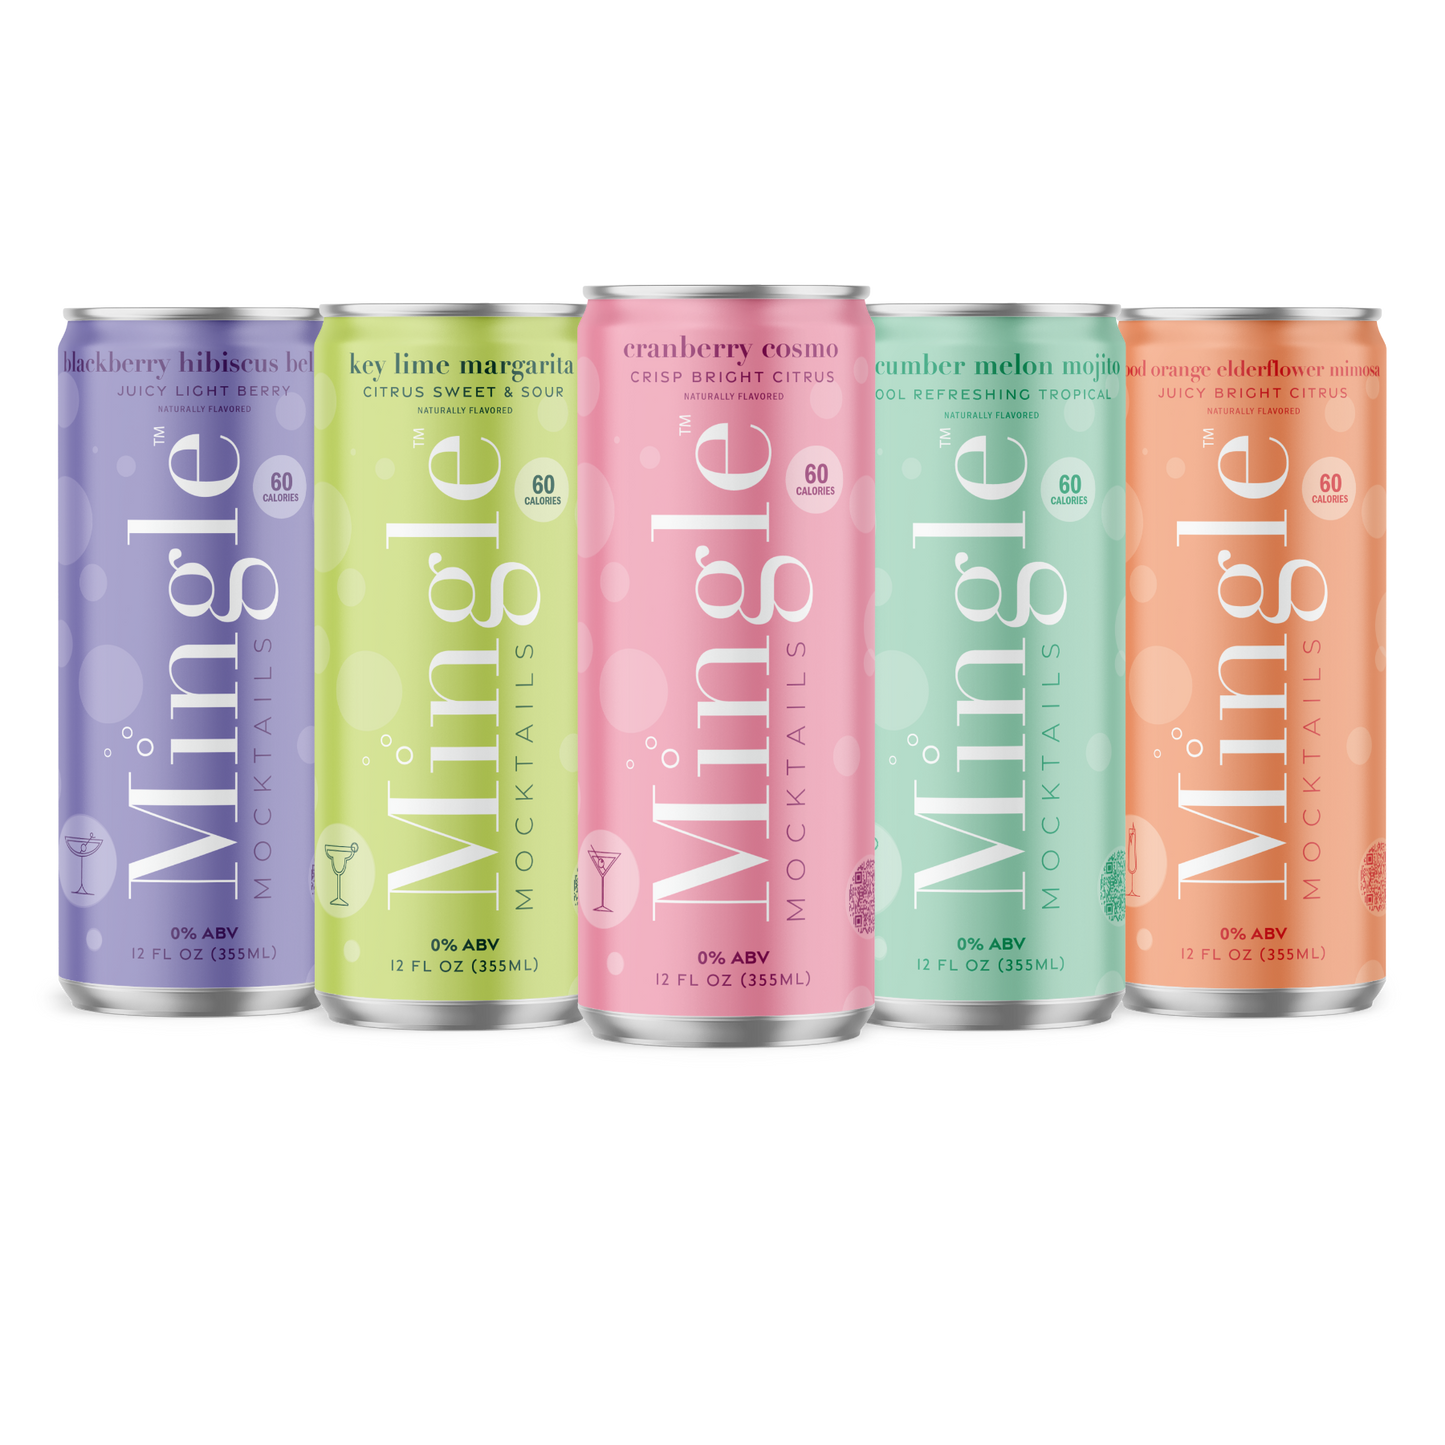 Variety Packs by Mingle Mocktails - Non Alcoholic Beverages